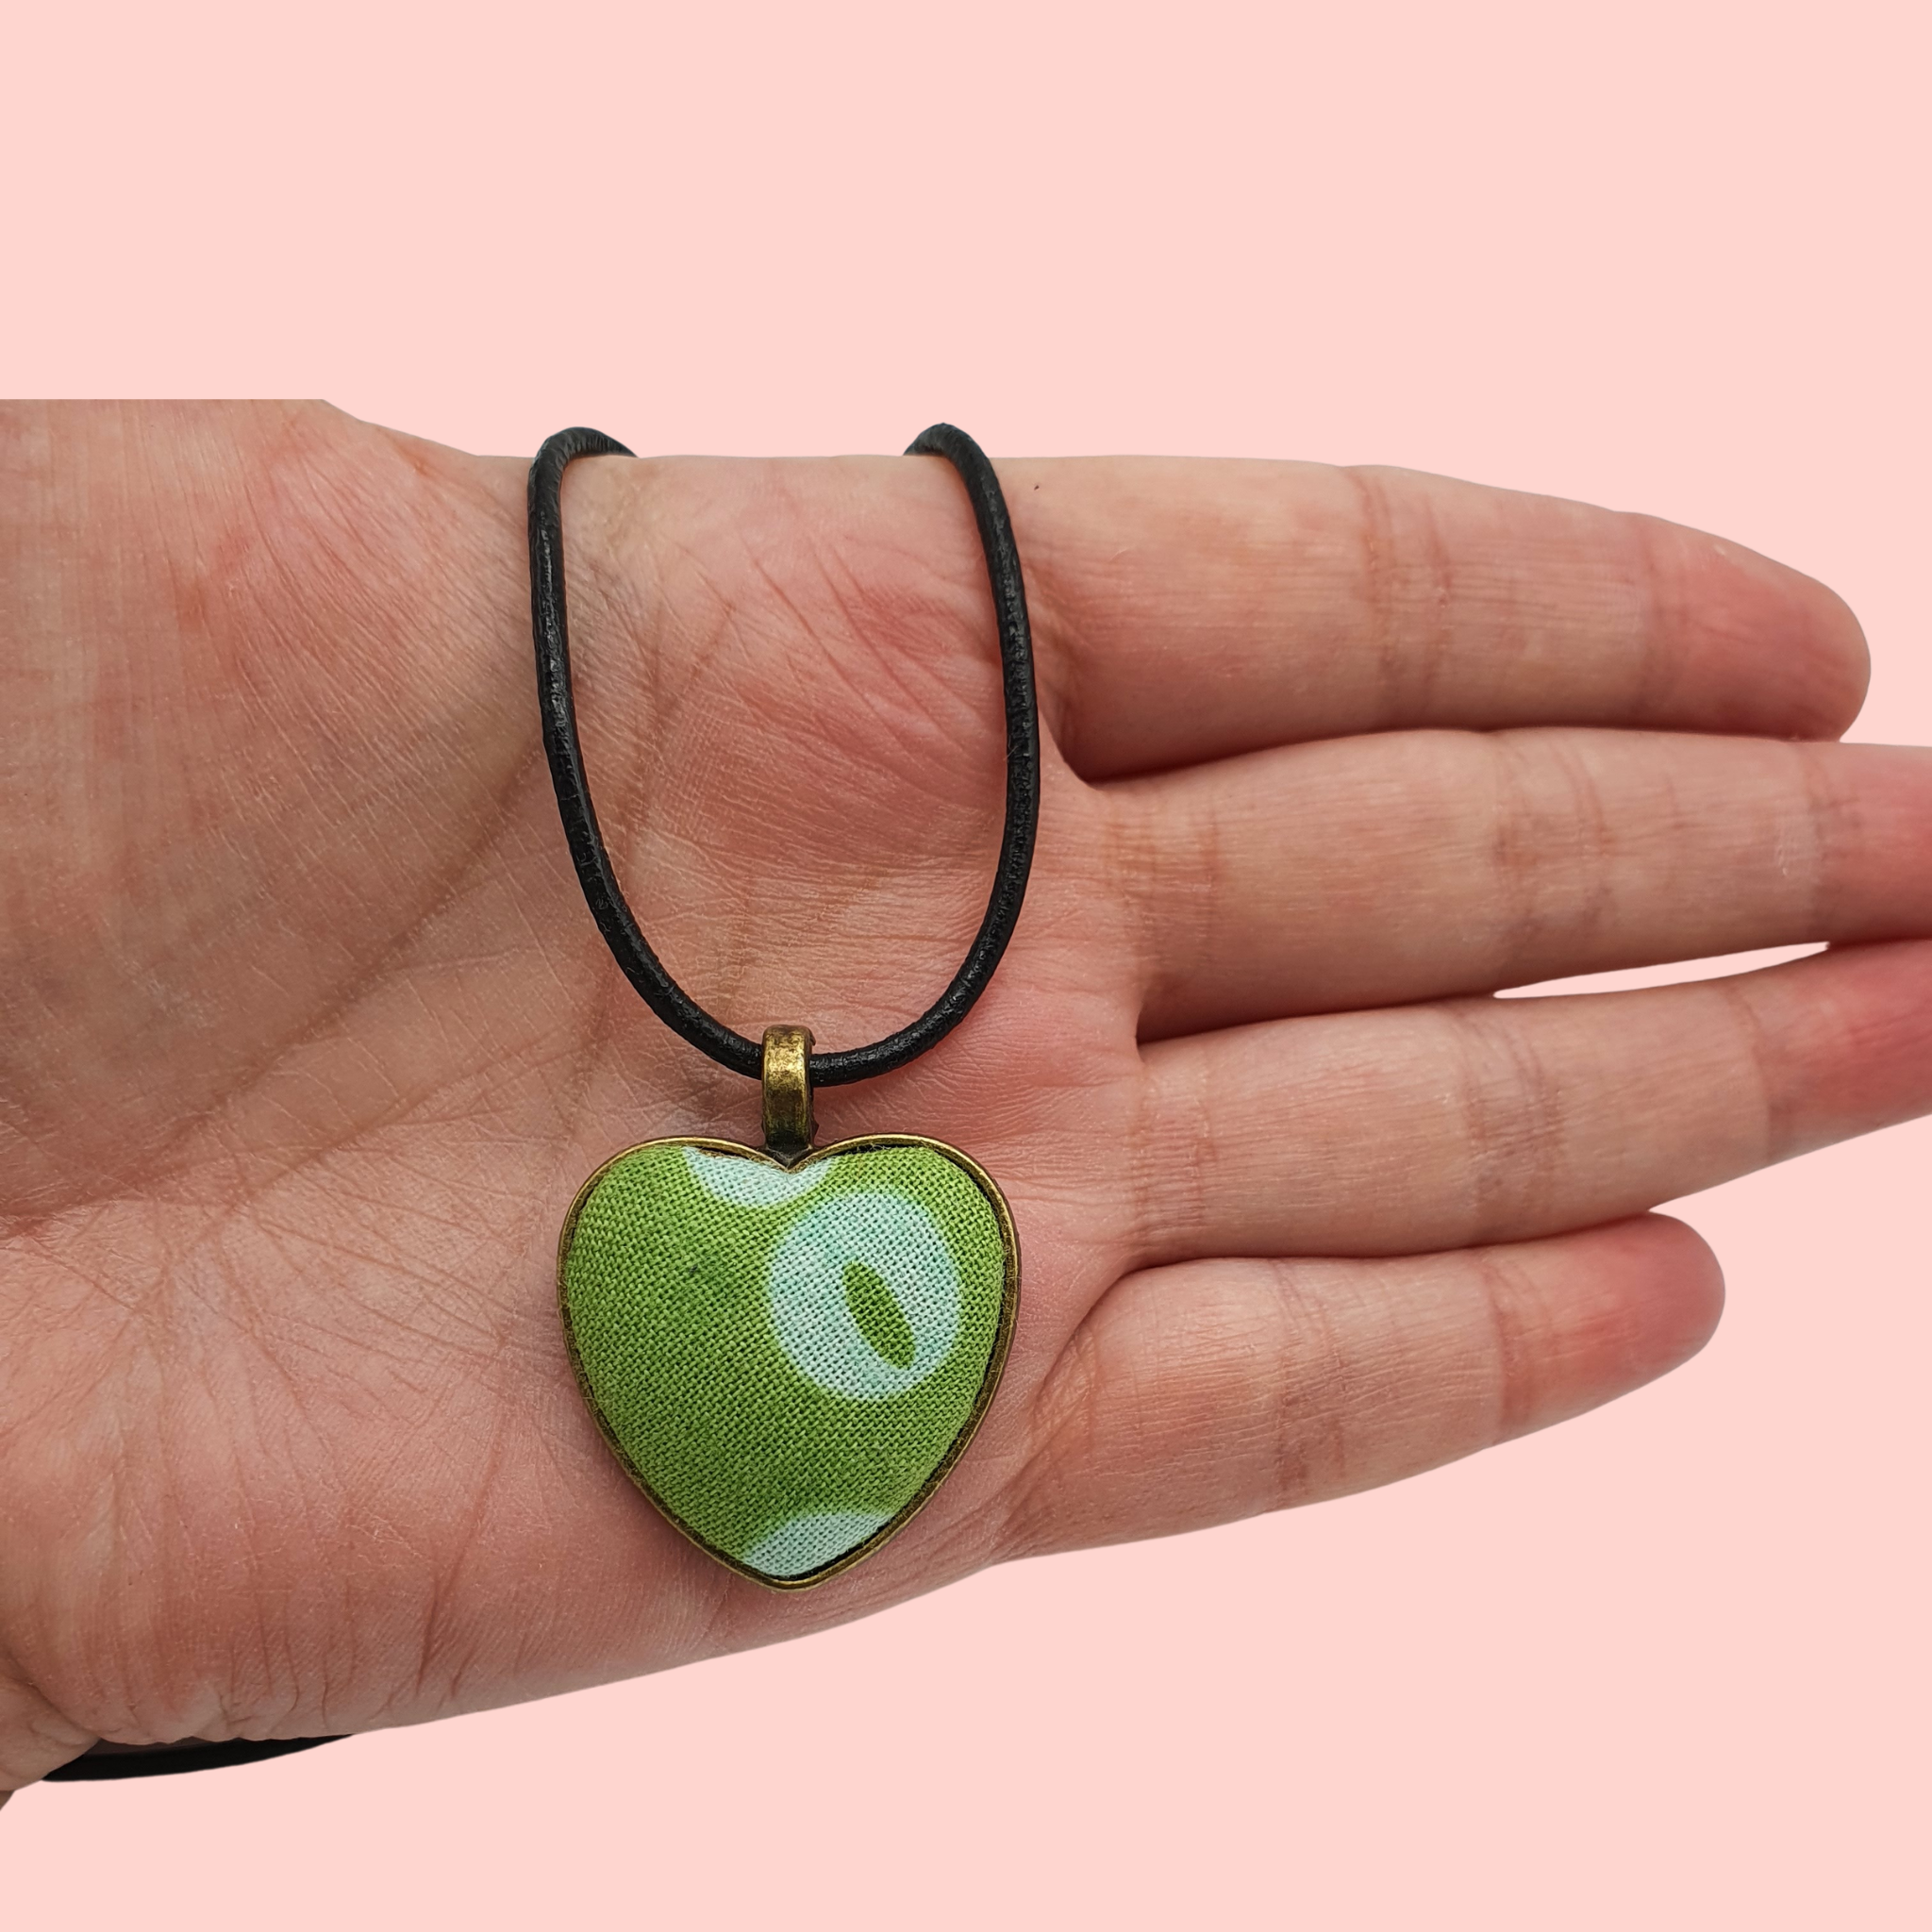 Green circle and spotty design fabric in a heart bronze bezel pendant.